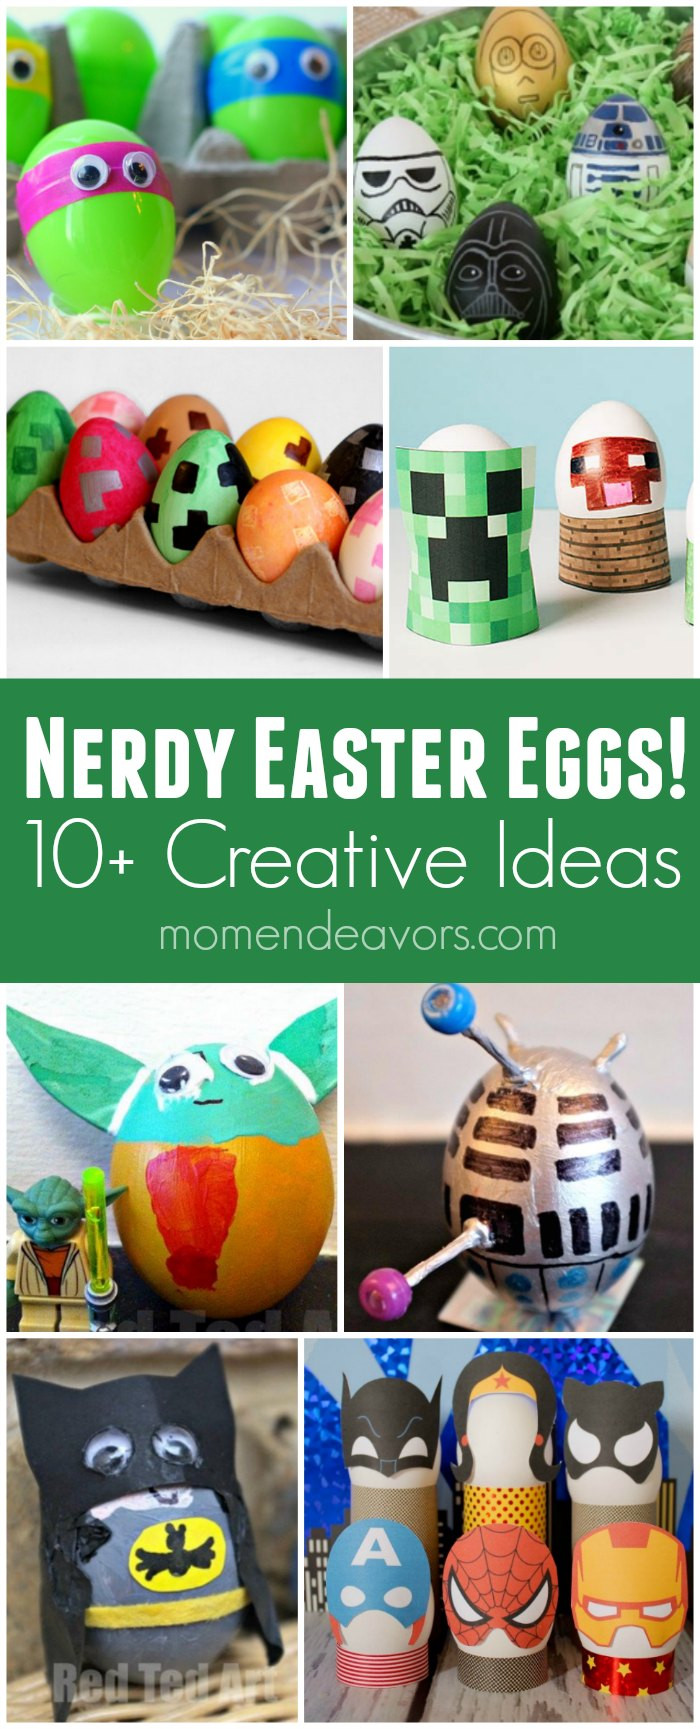 Easter Contest Ideas
 10 Nerdy Easter Egg Ideas Contest & Giveaway